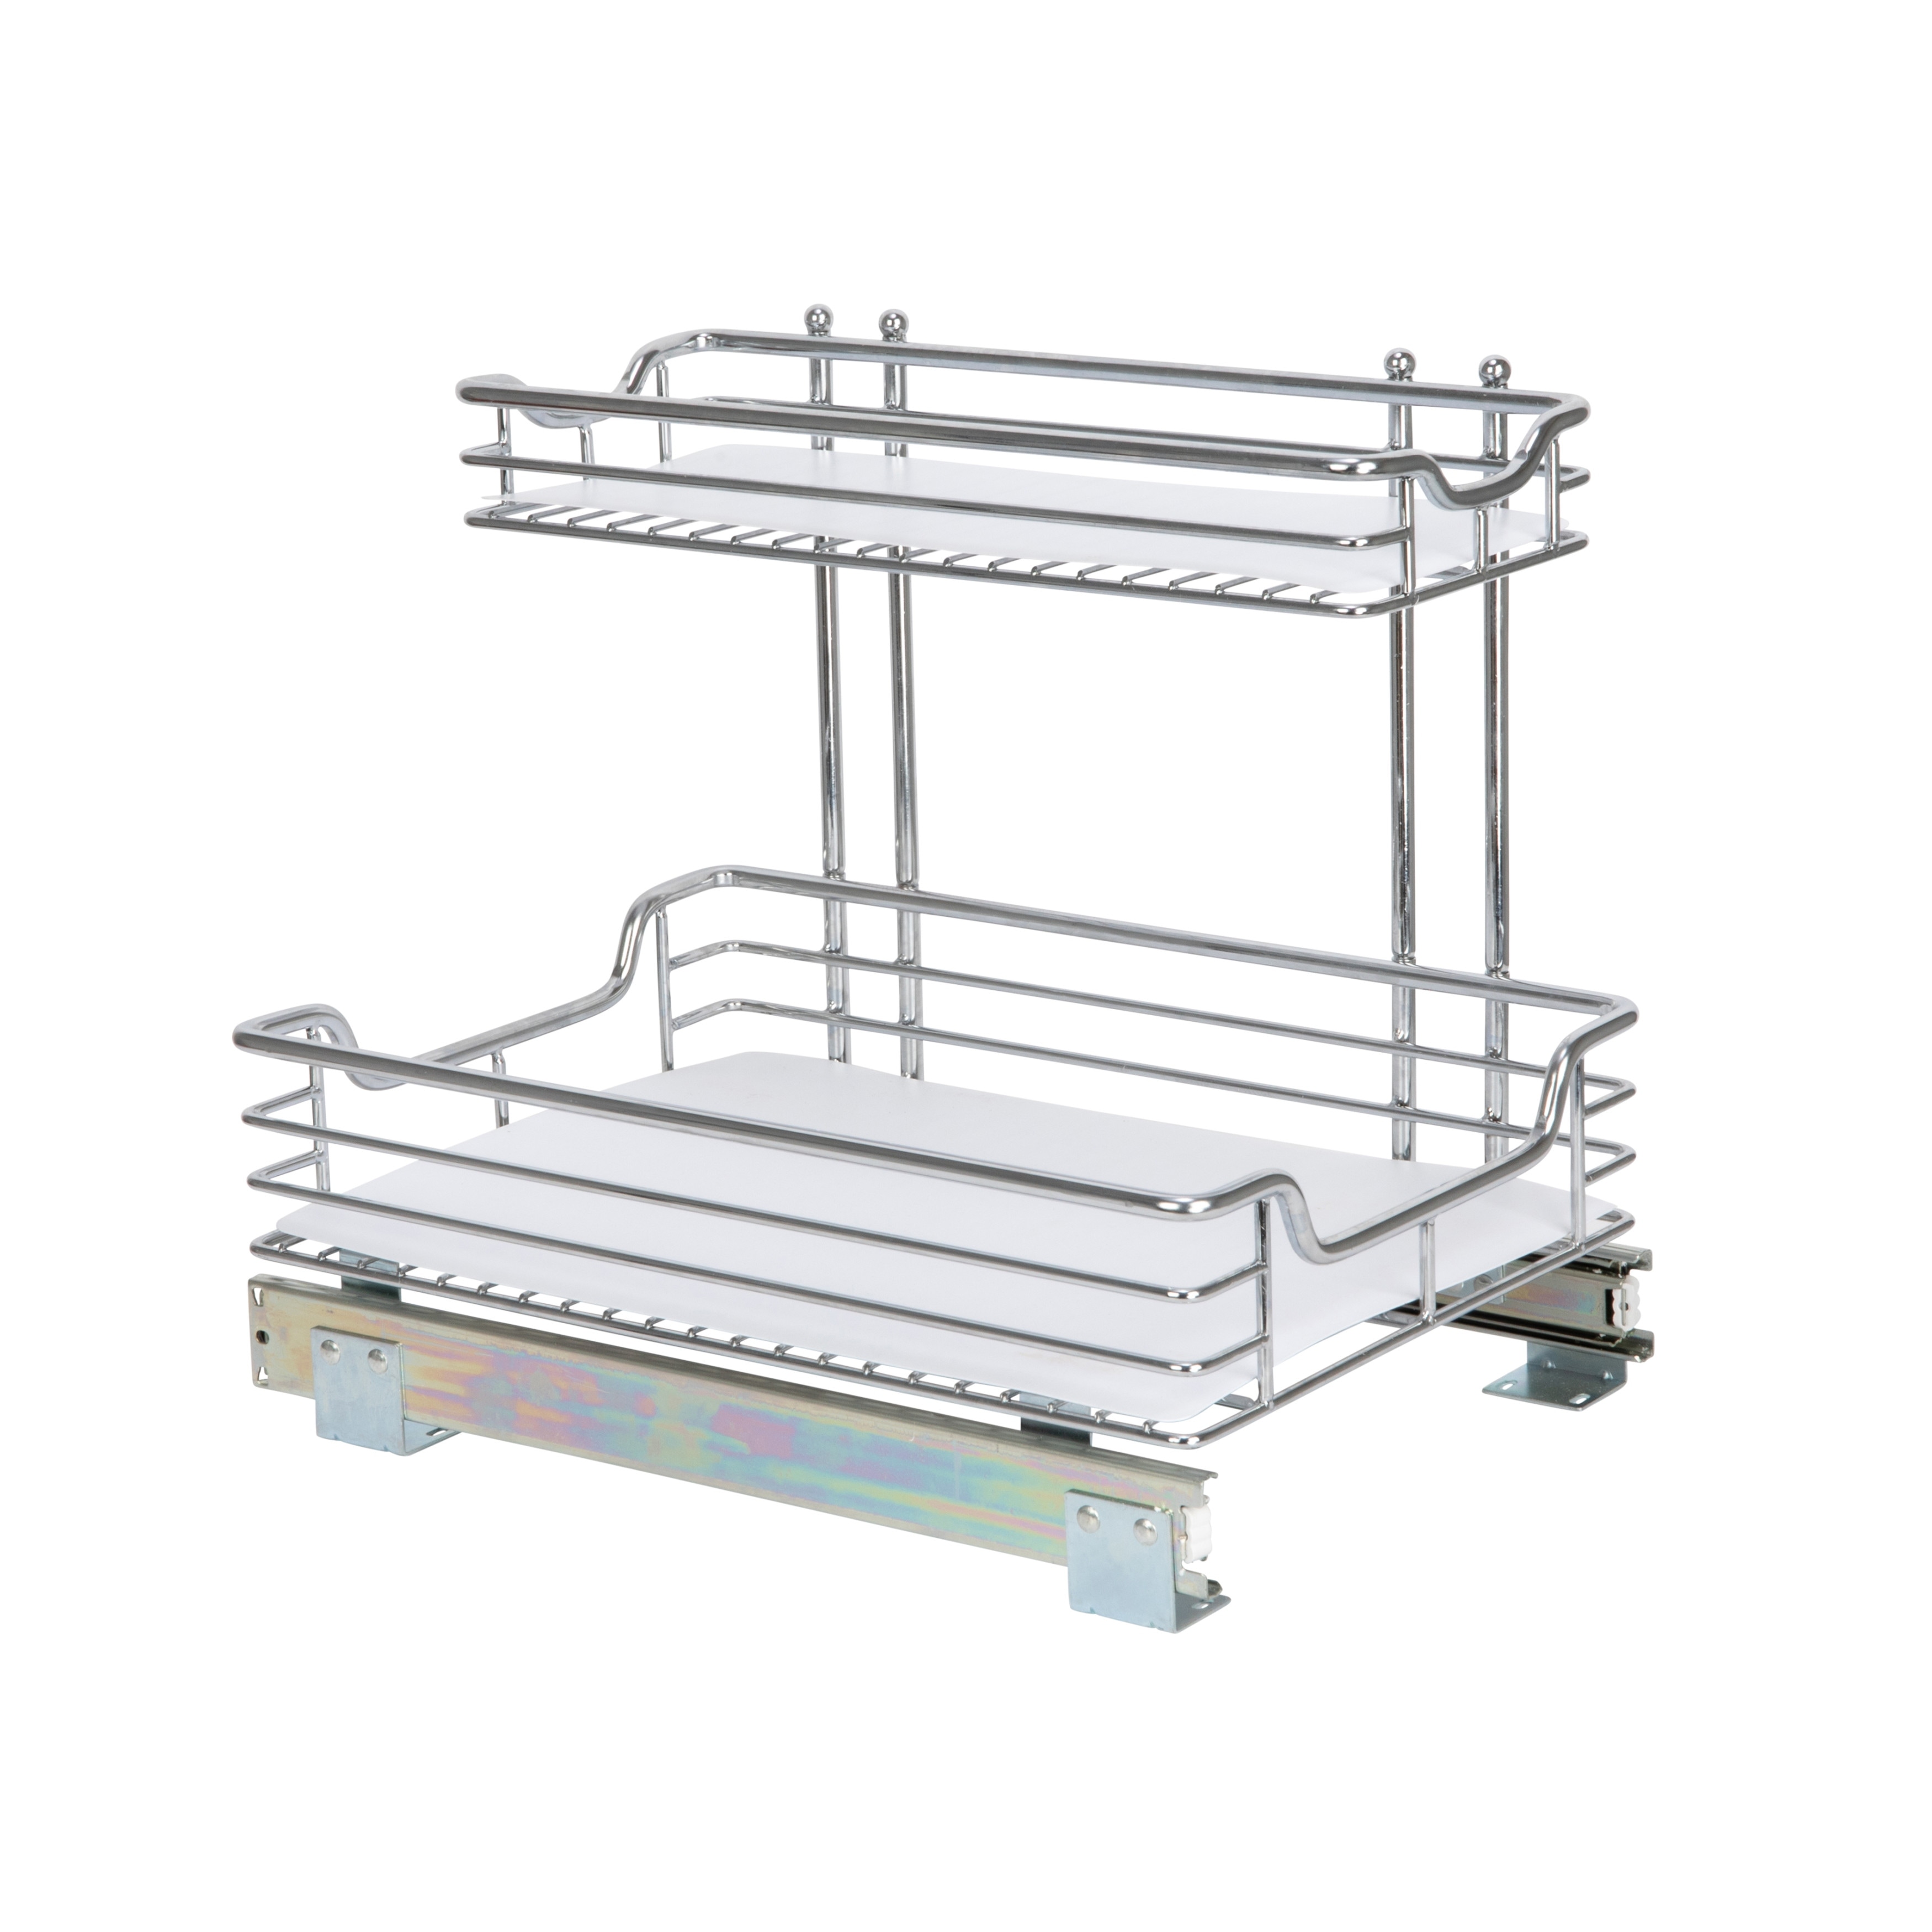 https://ak1.ostkcdn.com/images/products/is/images/direct/1ec3ab59b0e69d3a78f44dbb6c97c0bf2cbb82be/Glidez-2-Tier-Steel-Pull-Out-Slide-Out-Storage-Organizer-with-Plastic-Liners.jpg